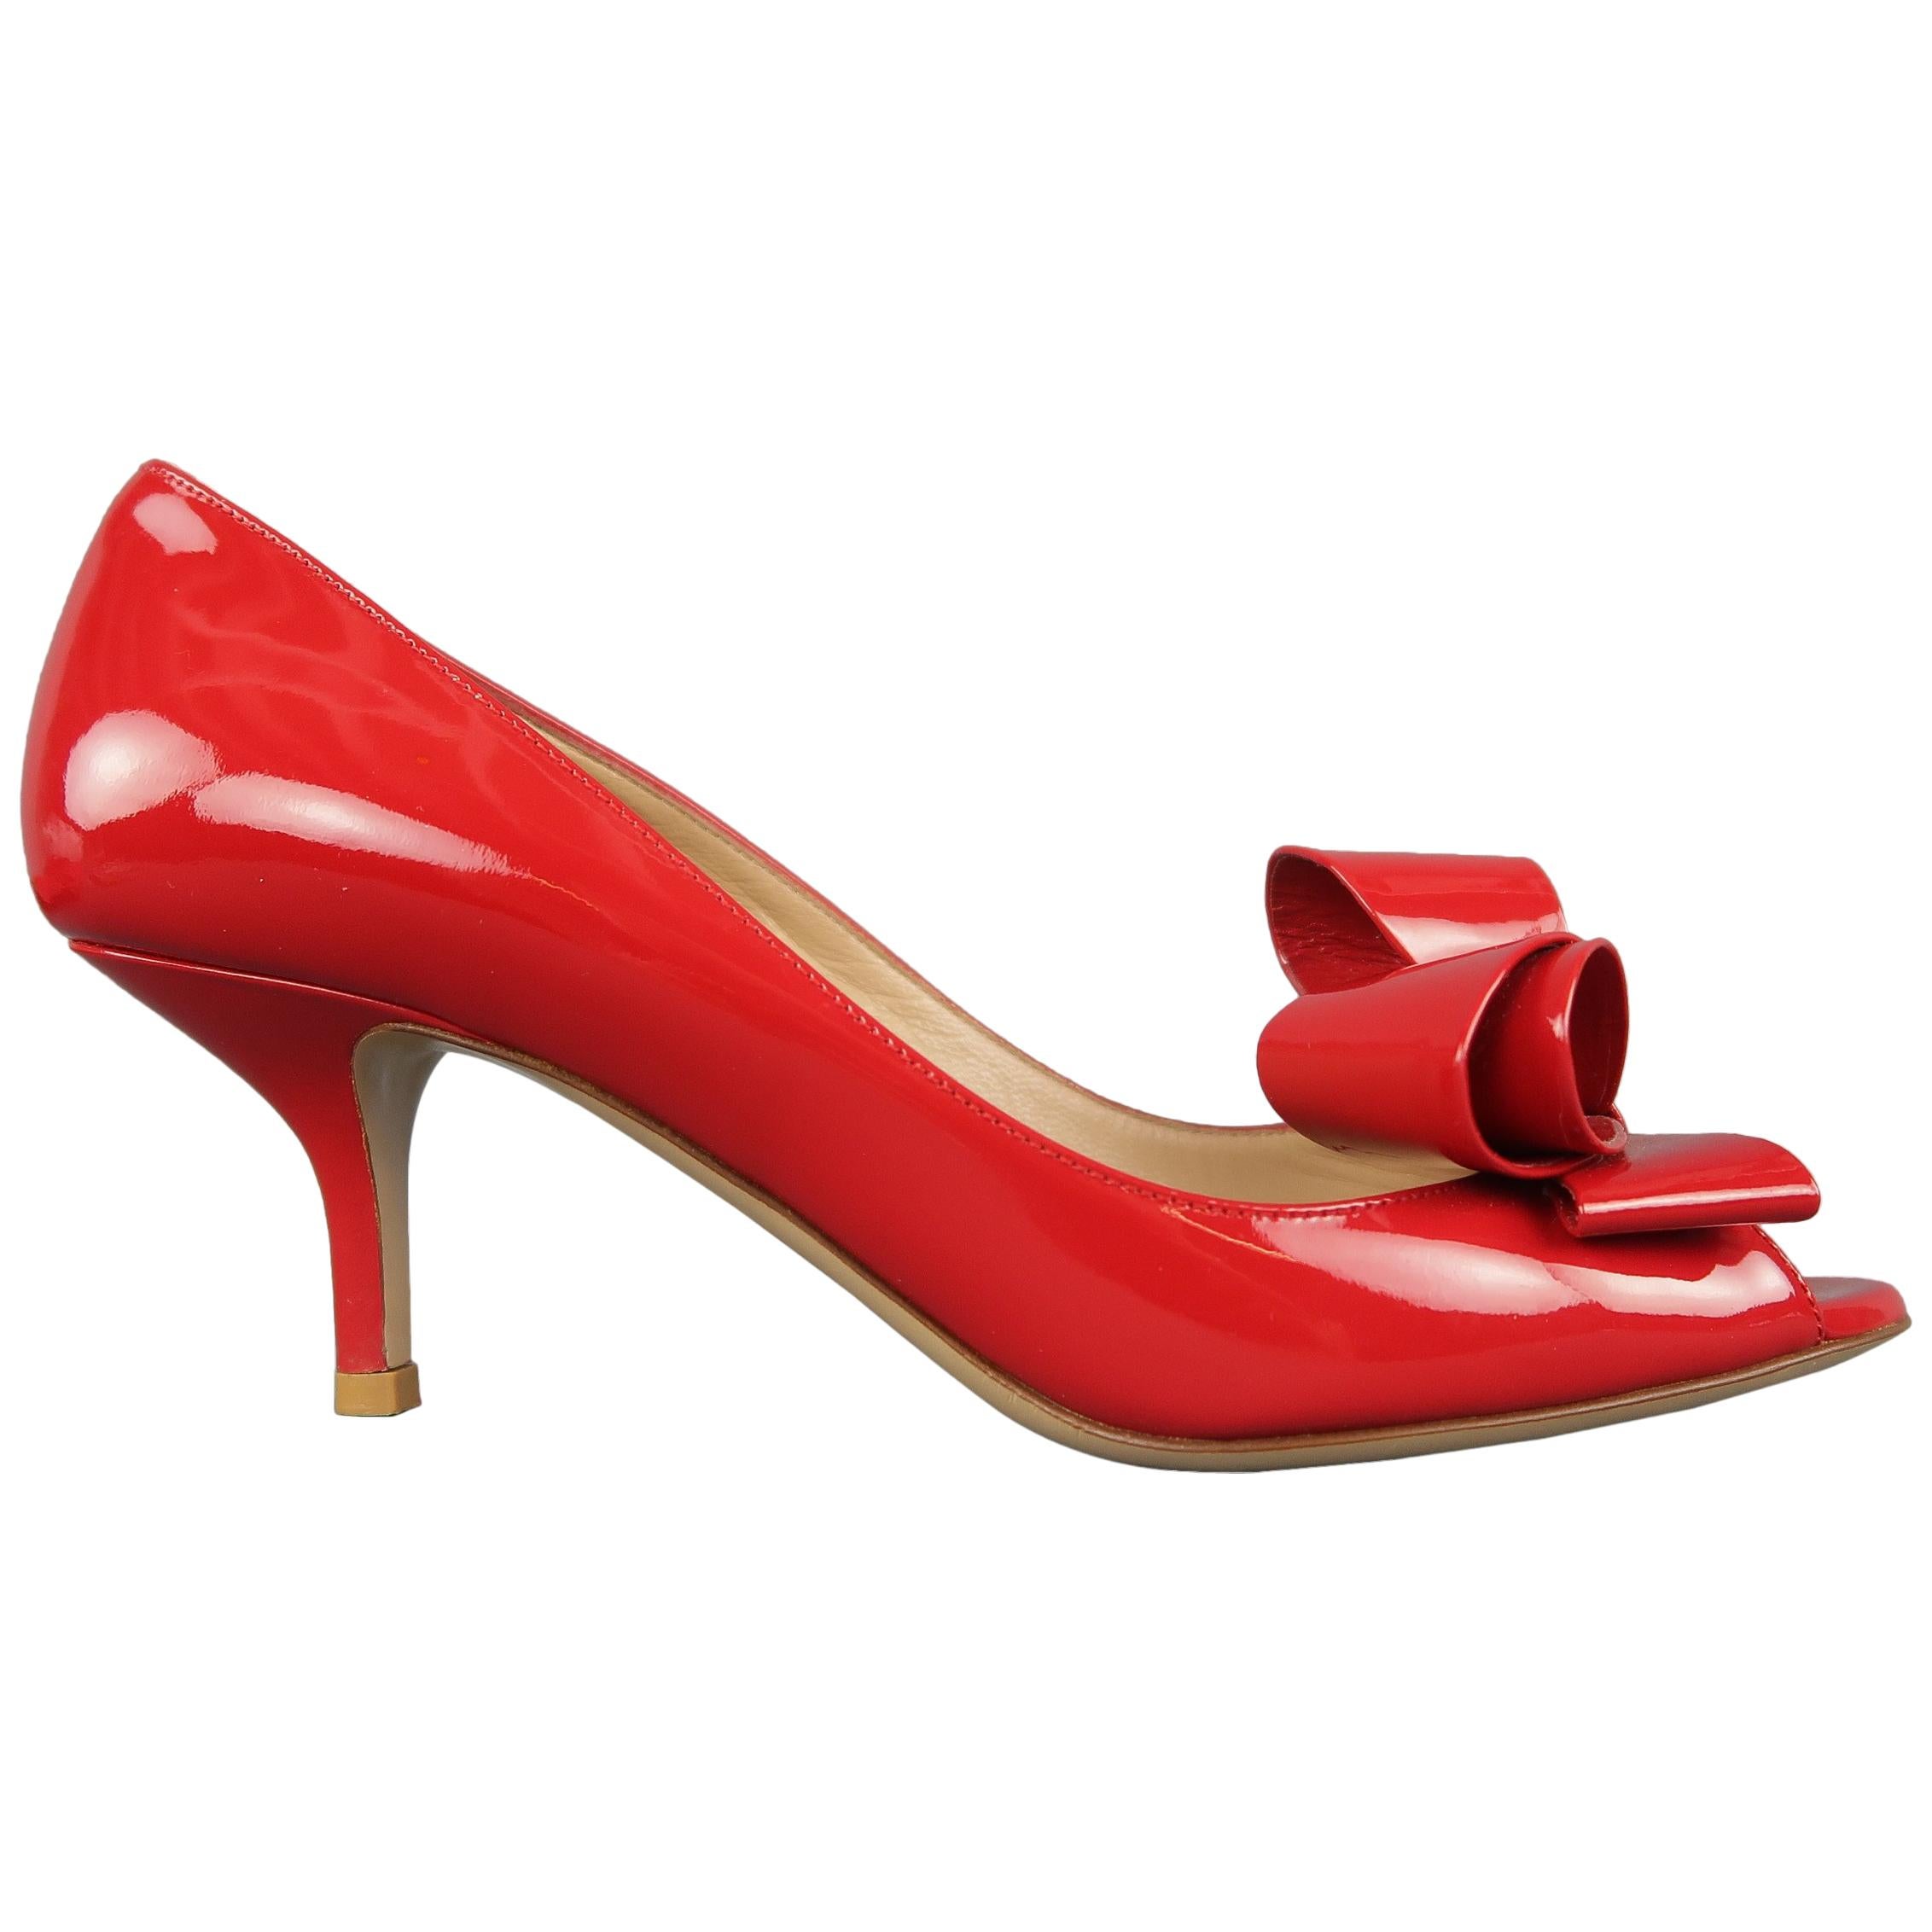 VALENTINO Size 8.5 Red Patent Leather Bow Peep Toe Pumps